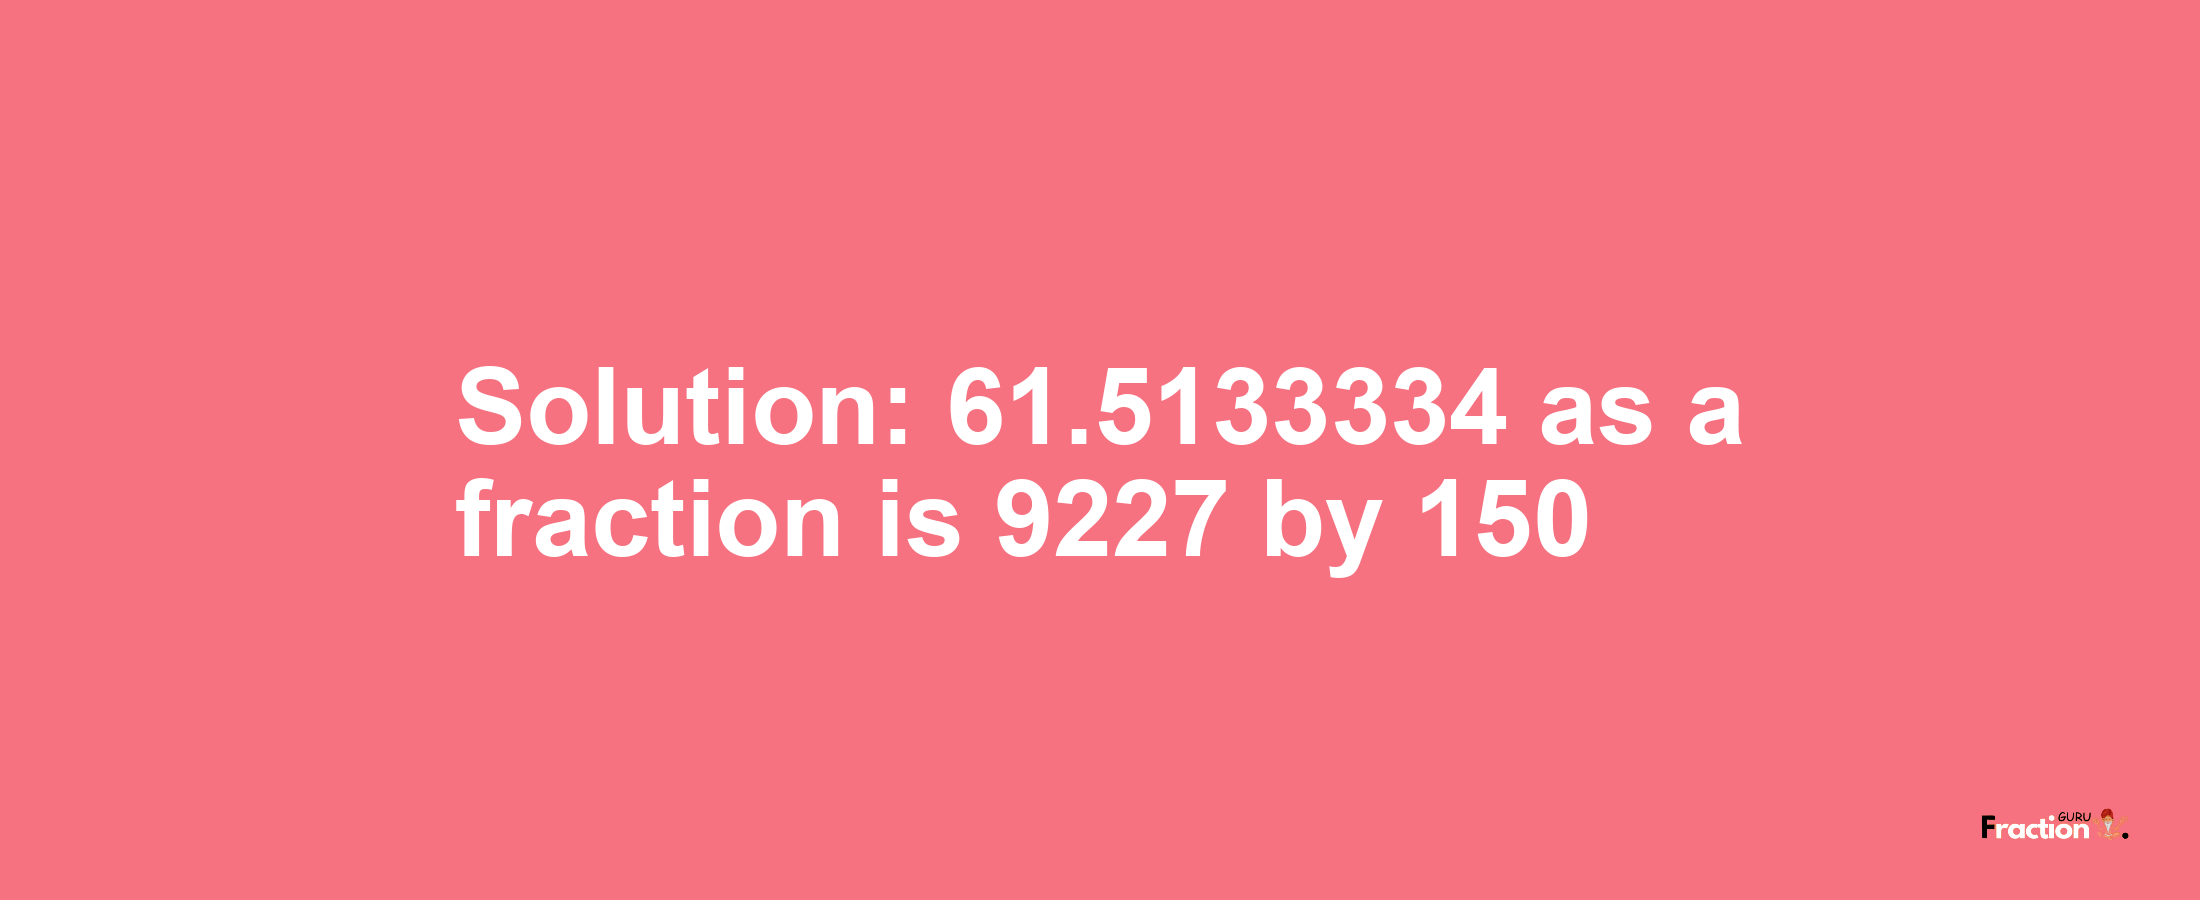 Solution:61.5133334 as a fraction is 9227/150